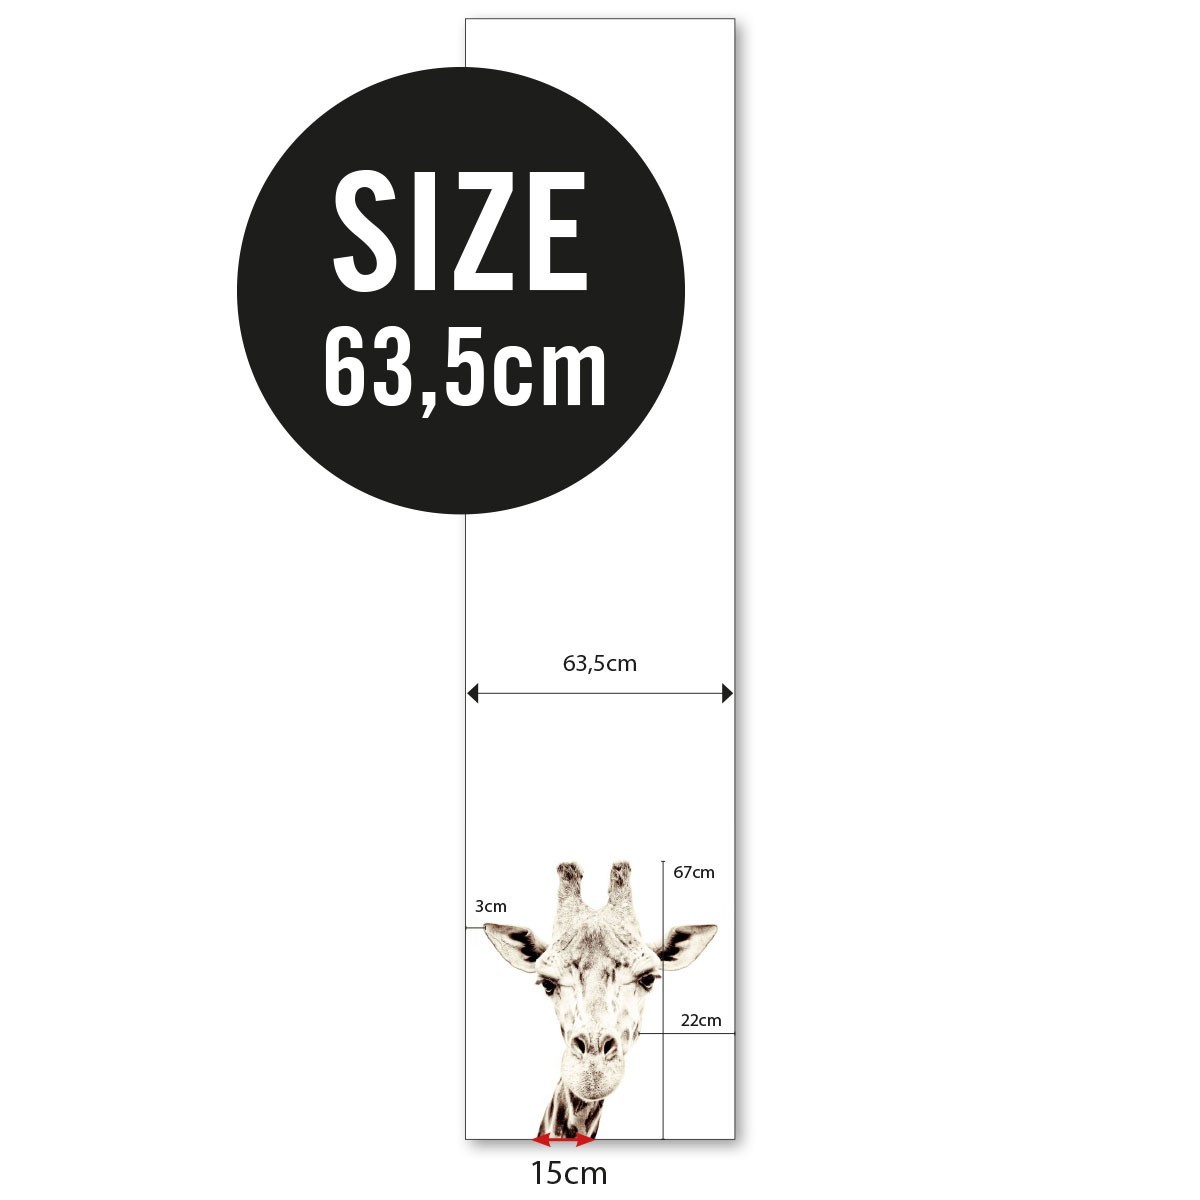 Magnetic wallpaper giraffe by Groovy Magnets